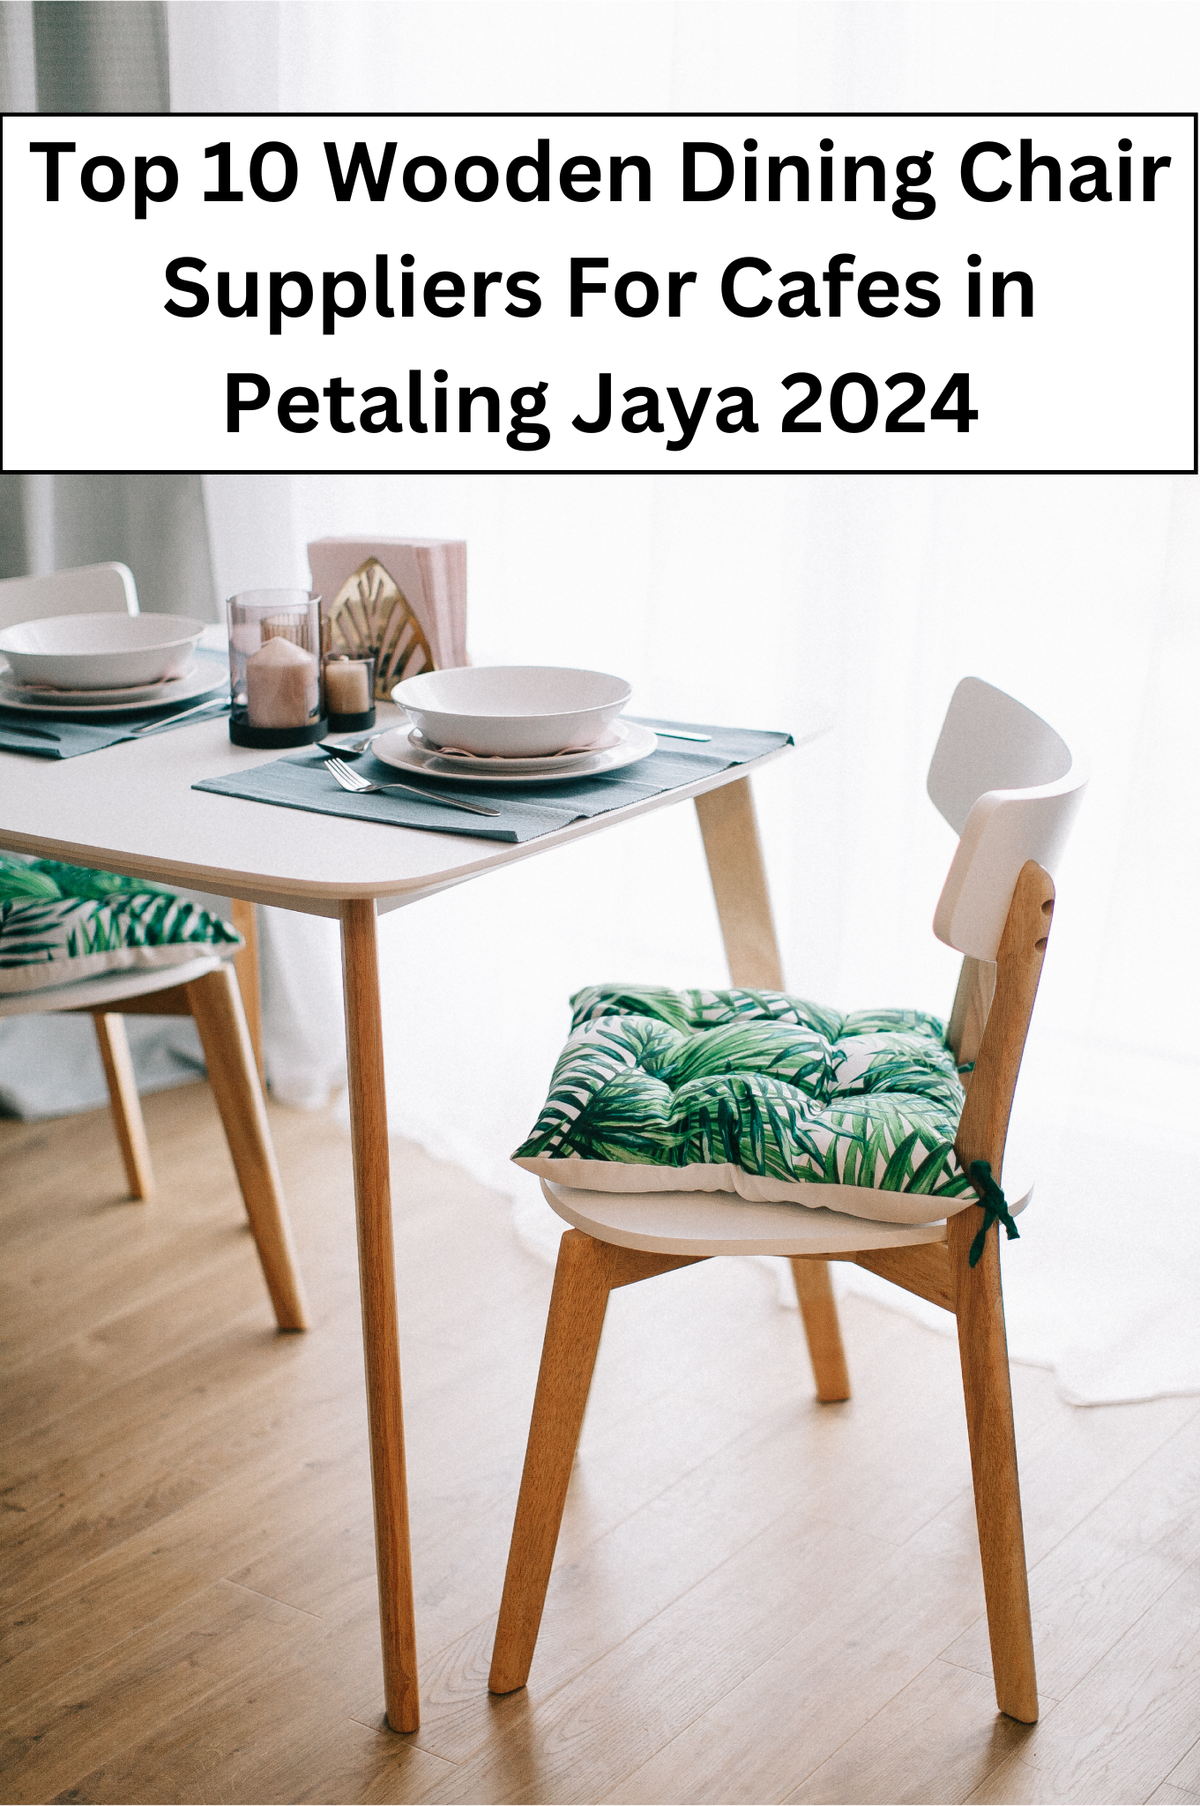 Top 10 Wooden Dining Chair Suppliers For Cafes in Petaling Jaya 2024